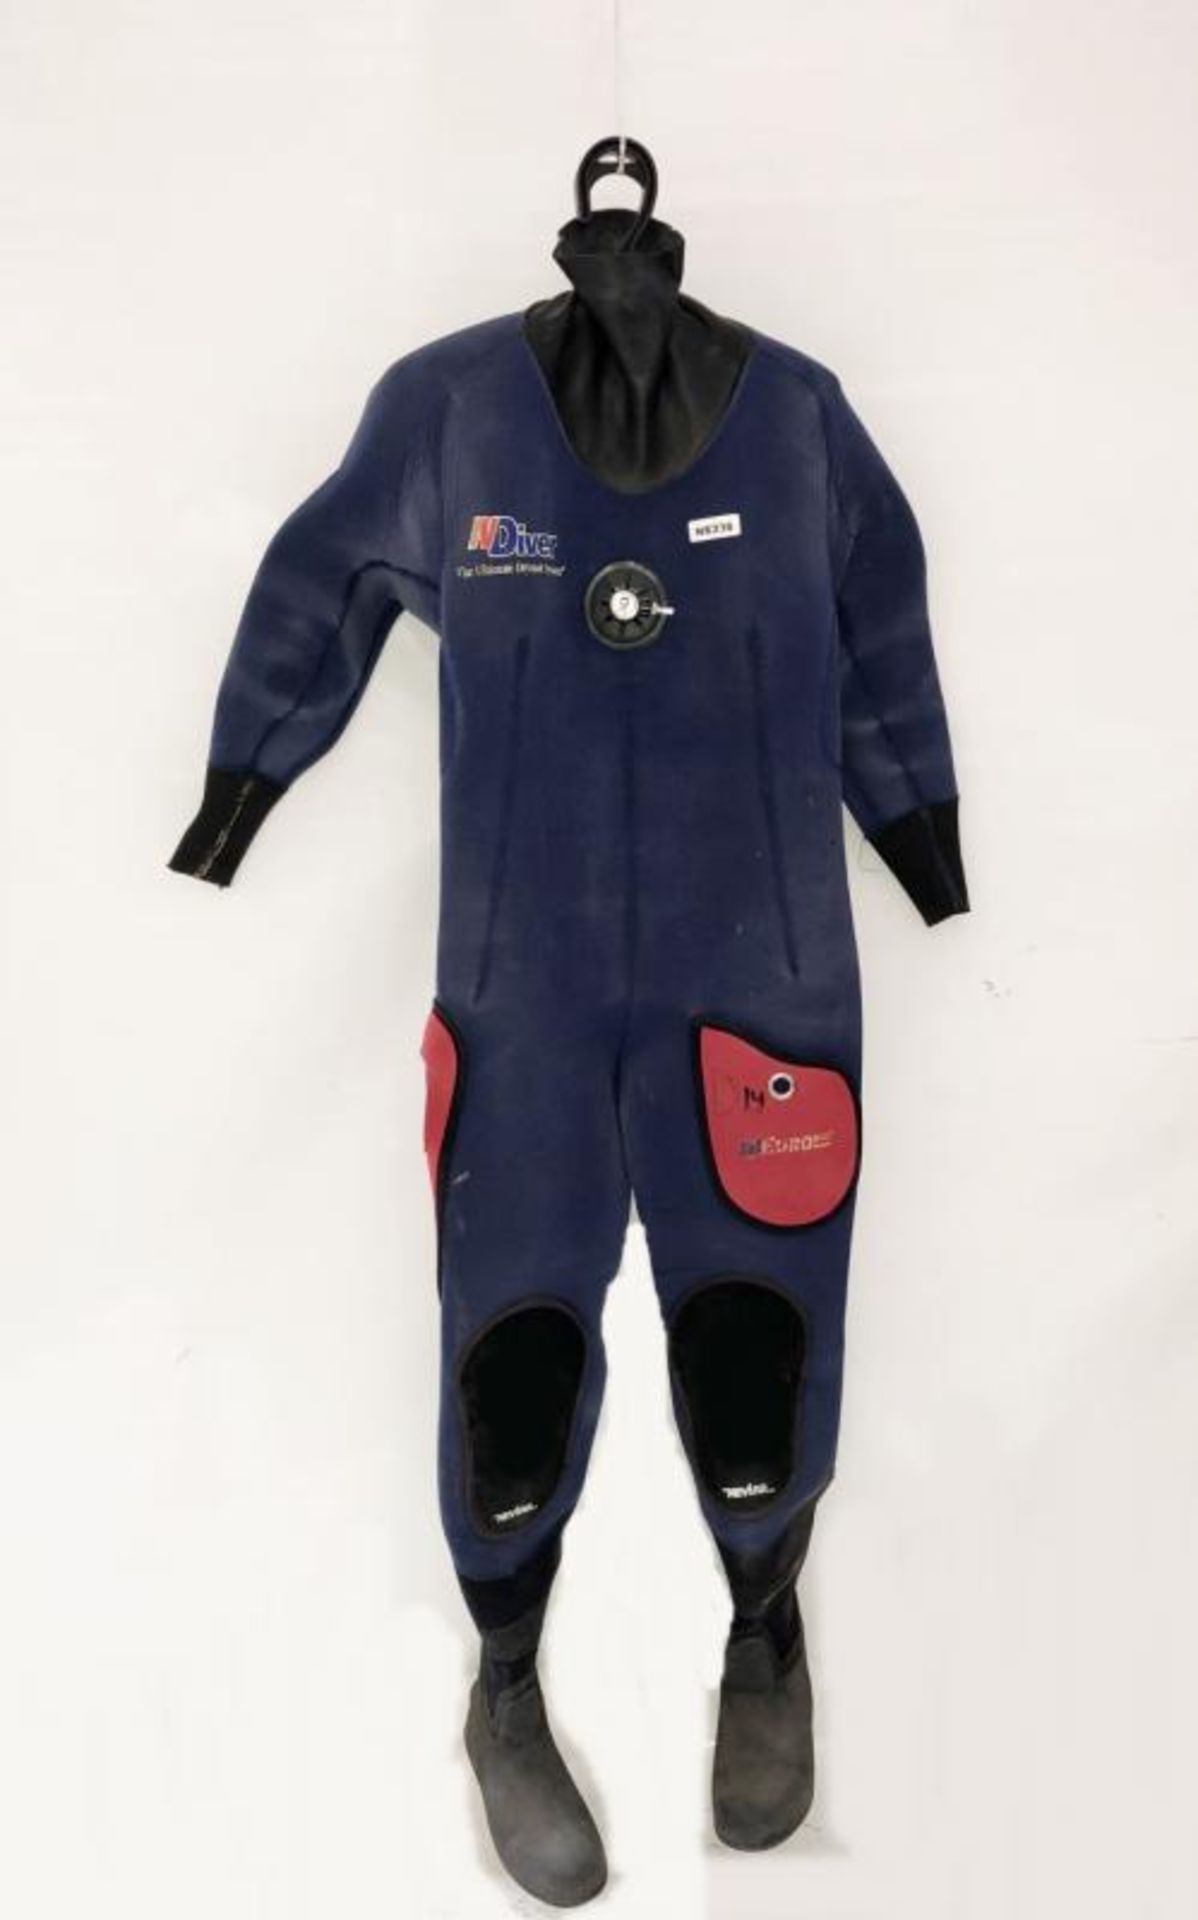 2 x Ladies Navy and Red Northern Diver Wetsuit's - Ref: NS336, NS360 - CL349 - Altrincham WA14